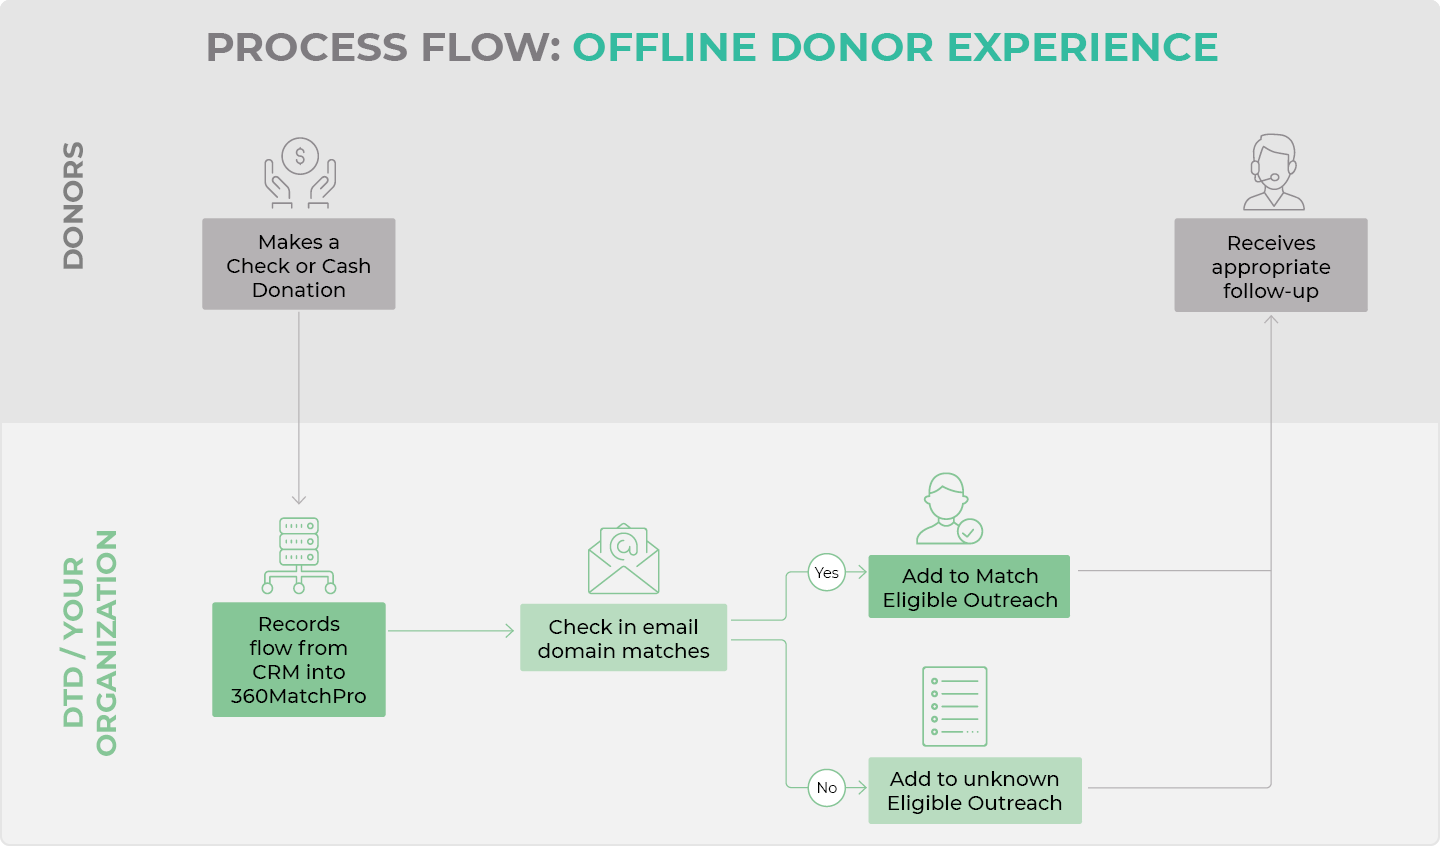 This is the process flow for improving the offline donor journey.